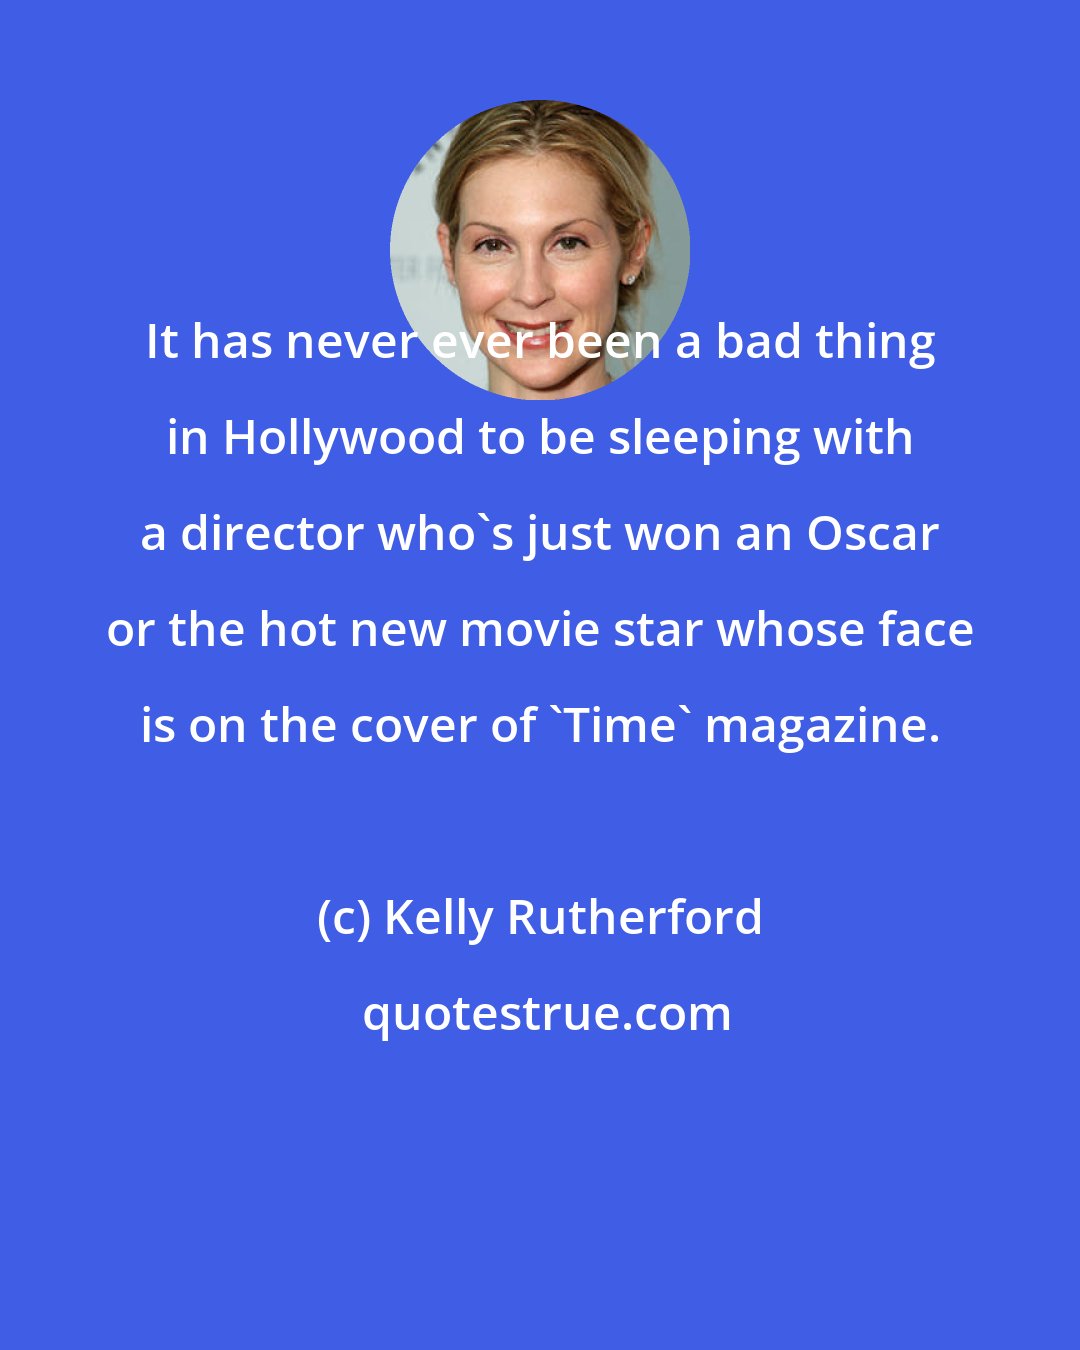 Kelly Rutherford: It has never ever been a bad thing in Hollywood to be sleeping with a director who's just won an Oscar or the hot new movie star whose face is on the cover of 'Time' magazine.